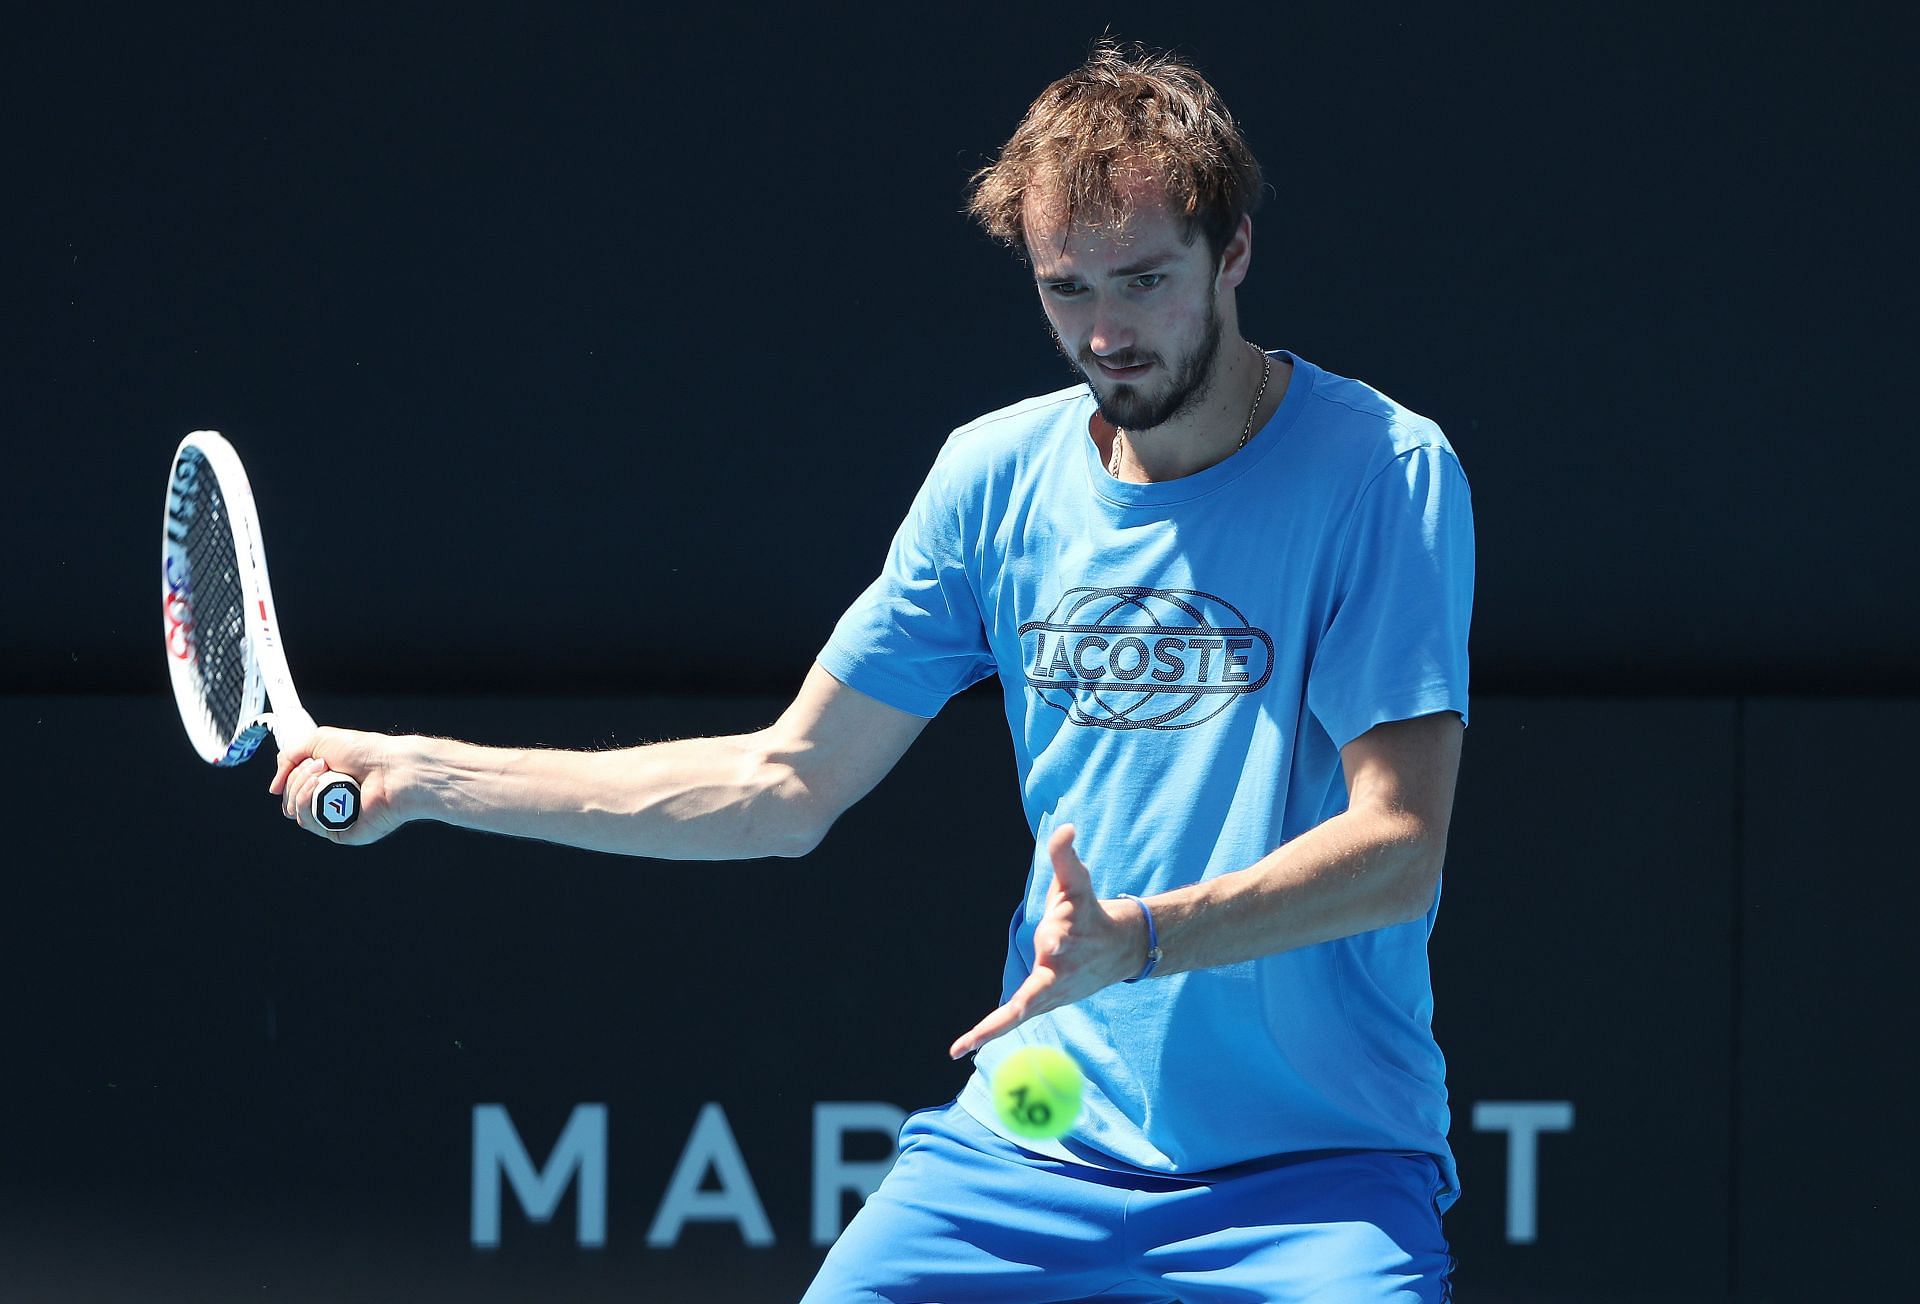 Medvedev during a practice session ahead of the 2023 Adelaide International